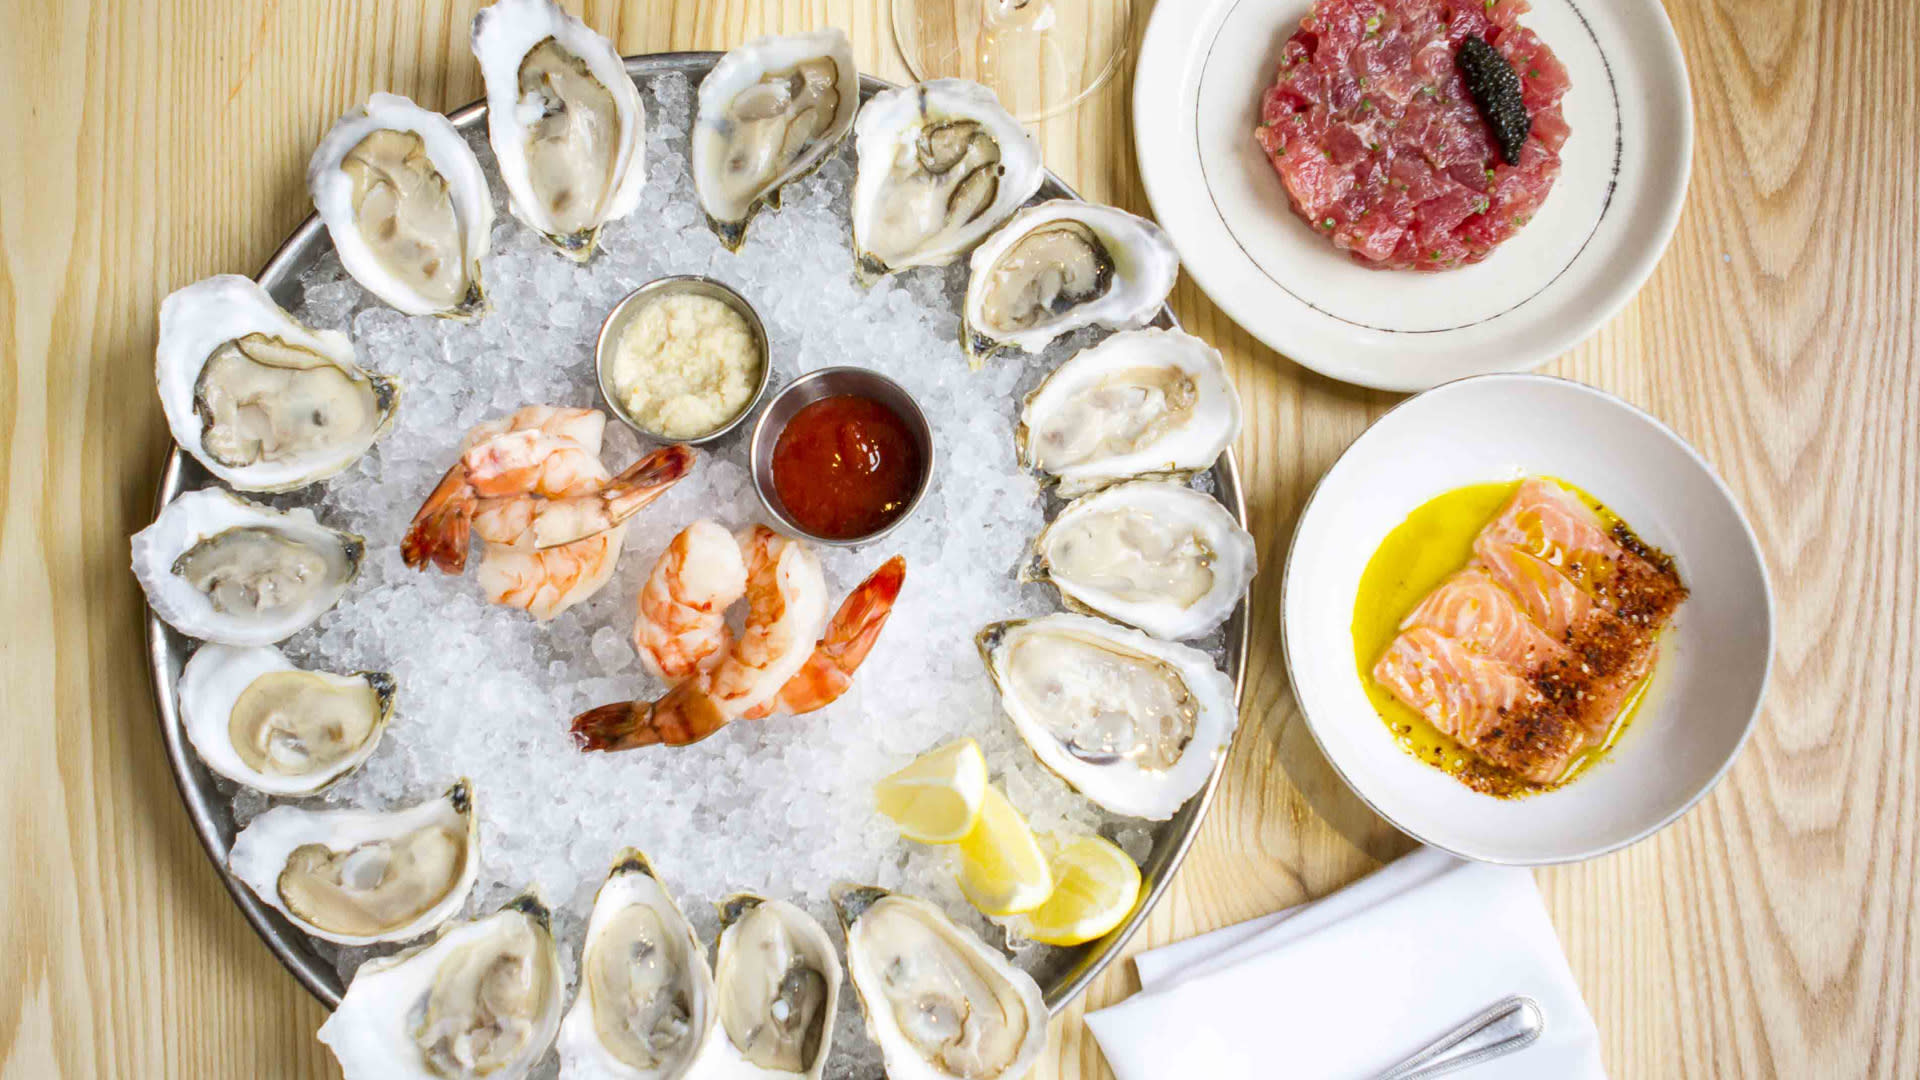 The 8 Restaurants Making Seafood Exciting in Boston